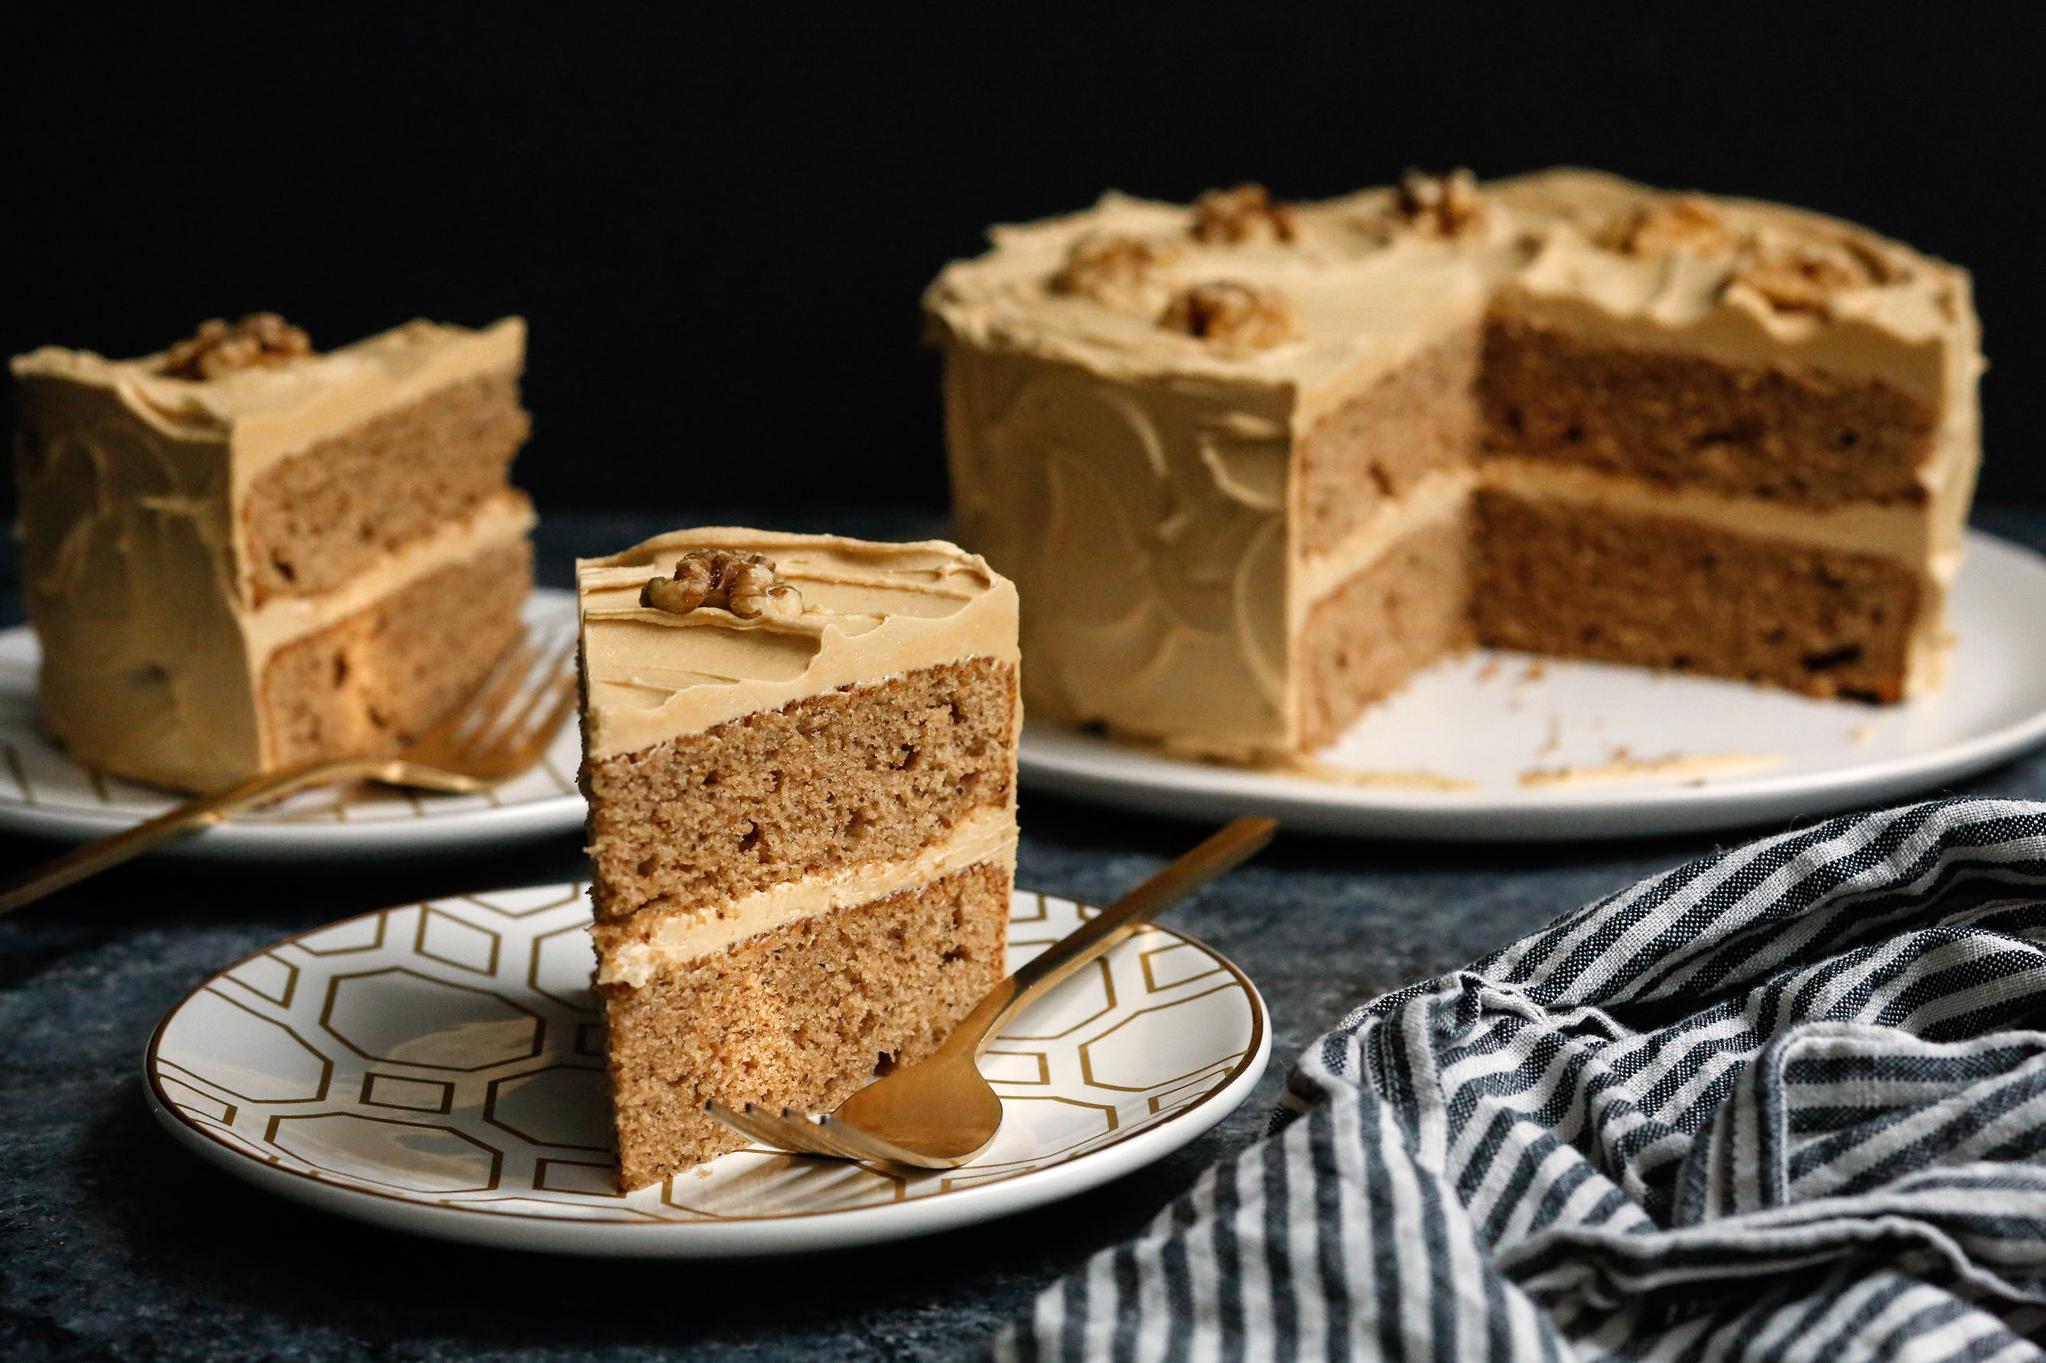  Don't settle for just a cup of joe when you can have a whole cake infused with coffee goodness!